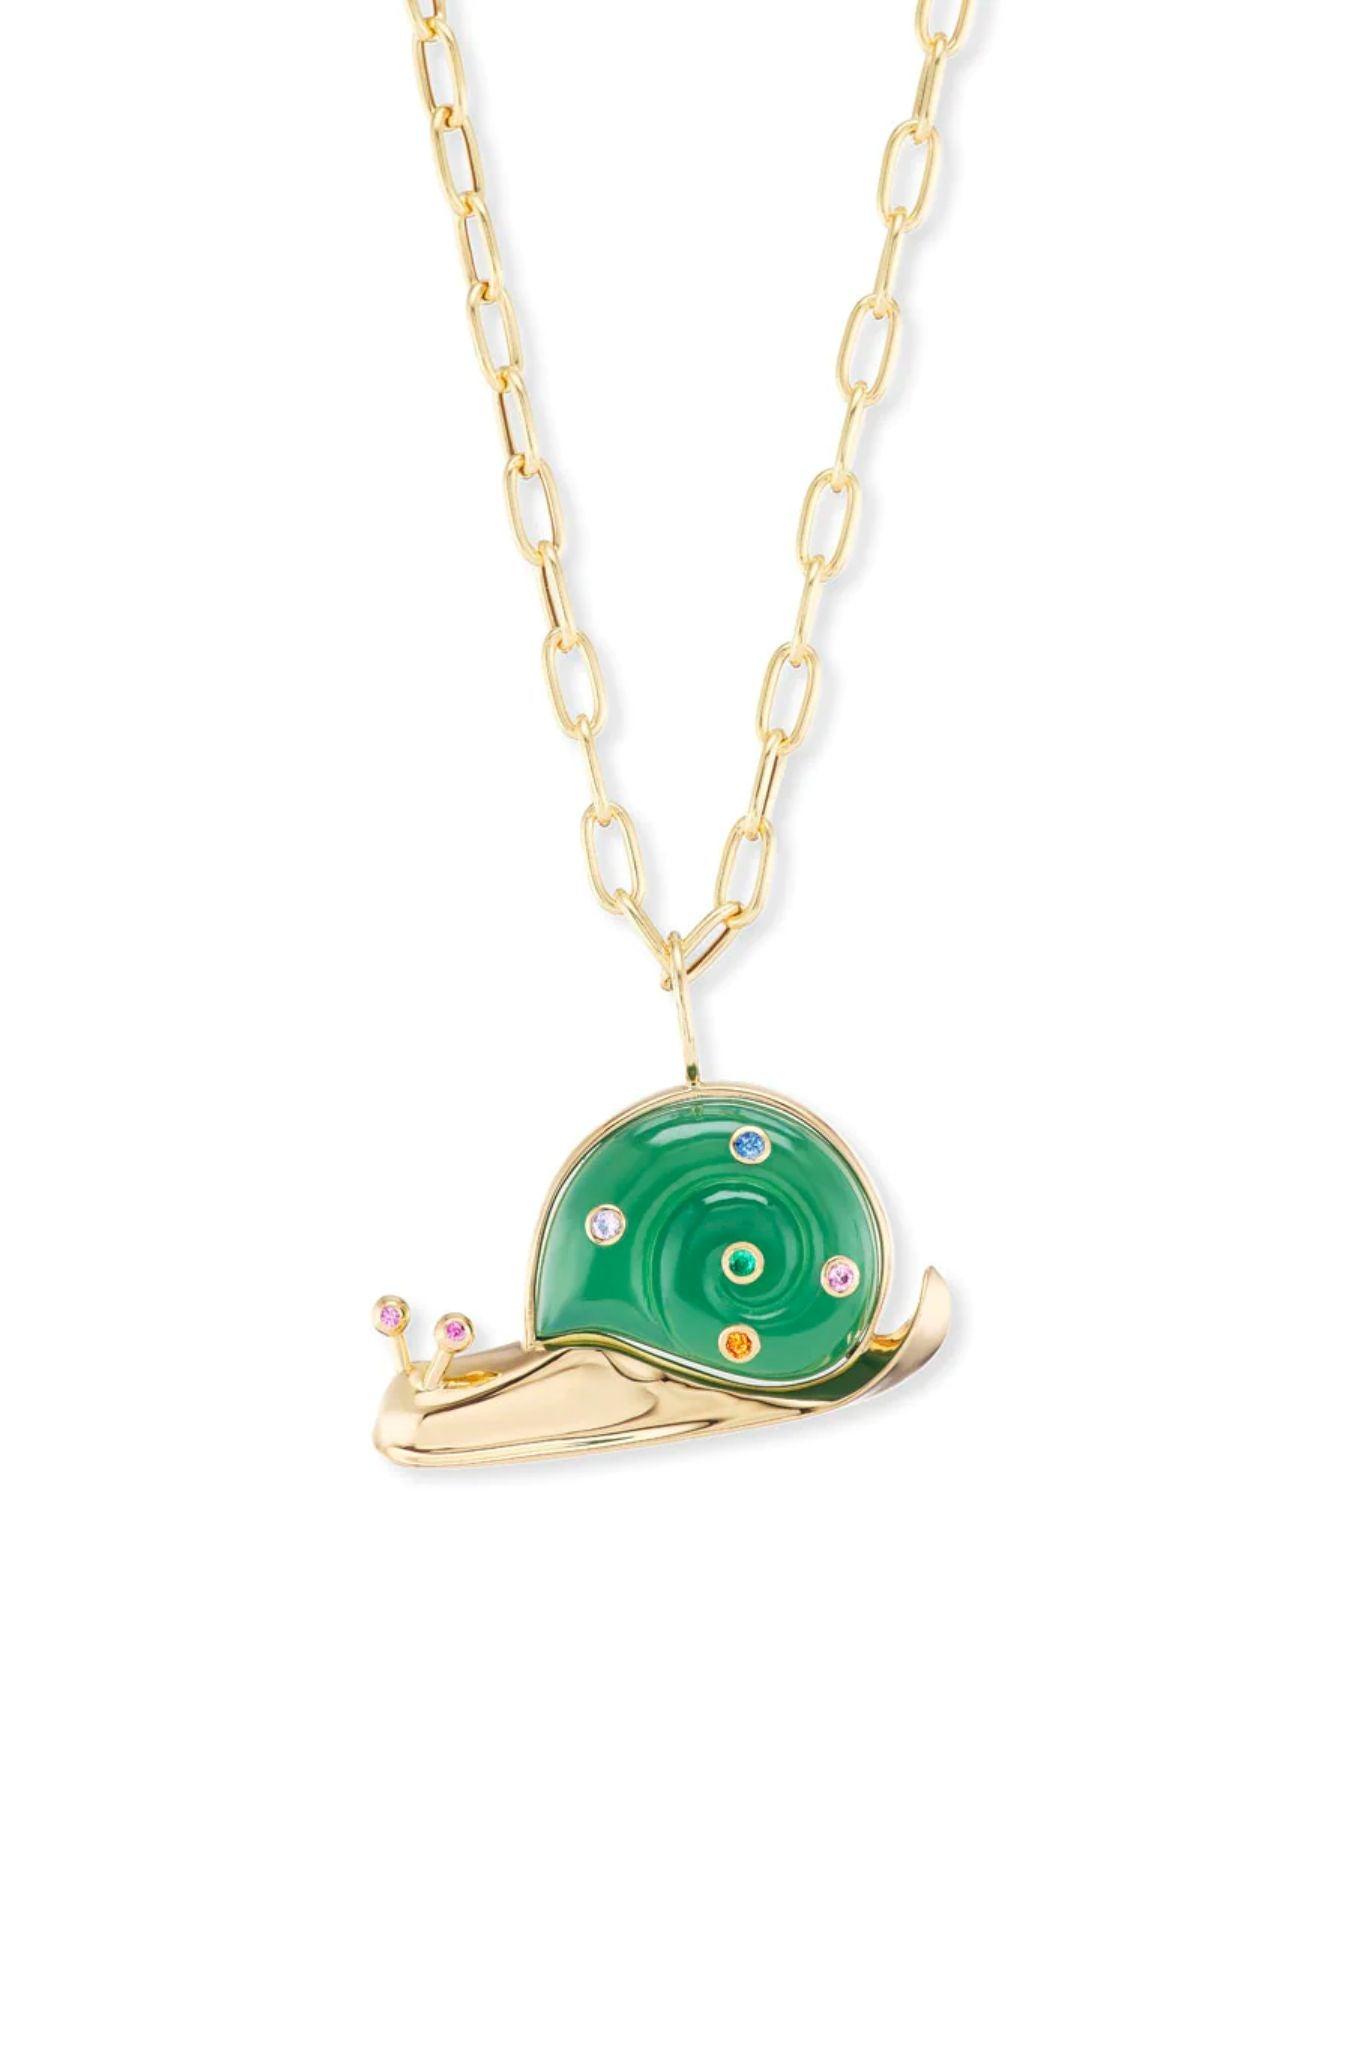 Brent Neale 18K Emerald & Turquoise Medium Shell Pendant Necklace - 18K  Yellow Gold Pendant Necklace, Necklaces - BNRTN20159 | The RealReal